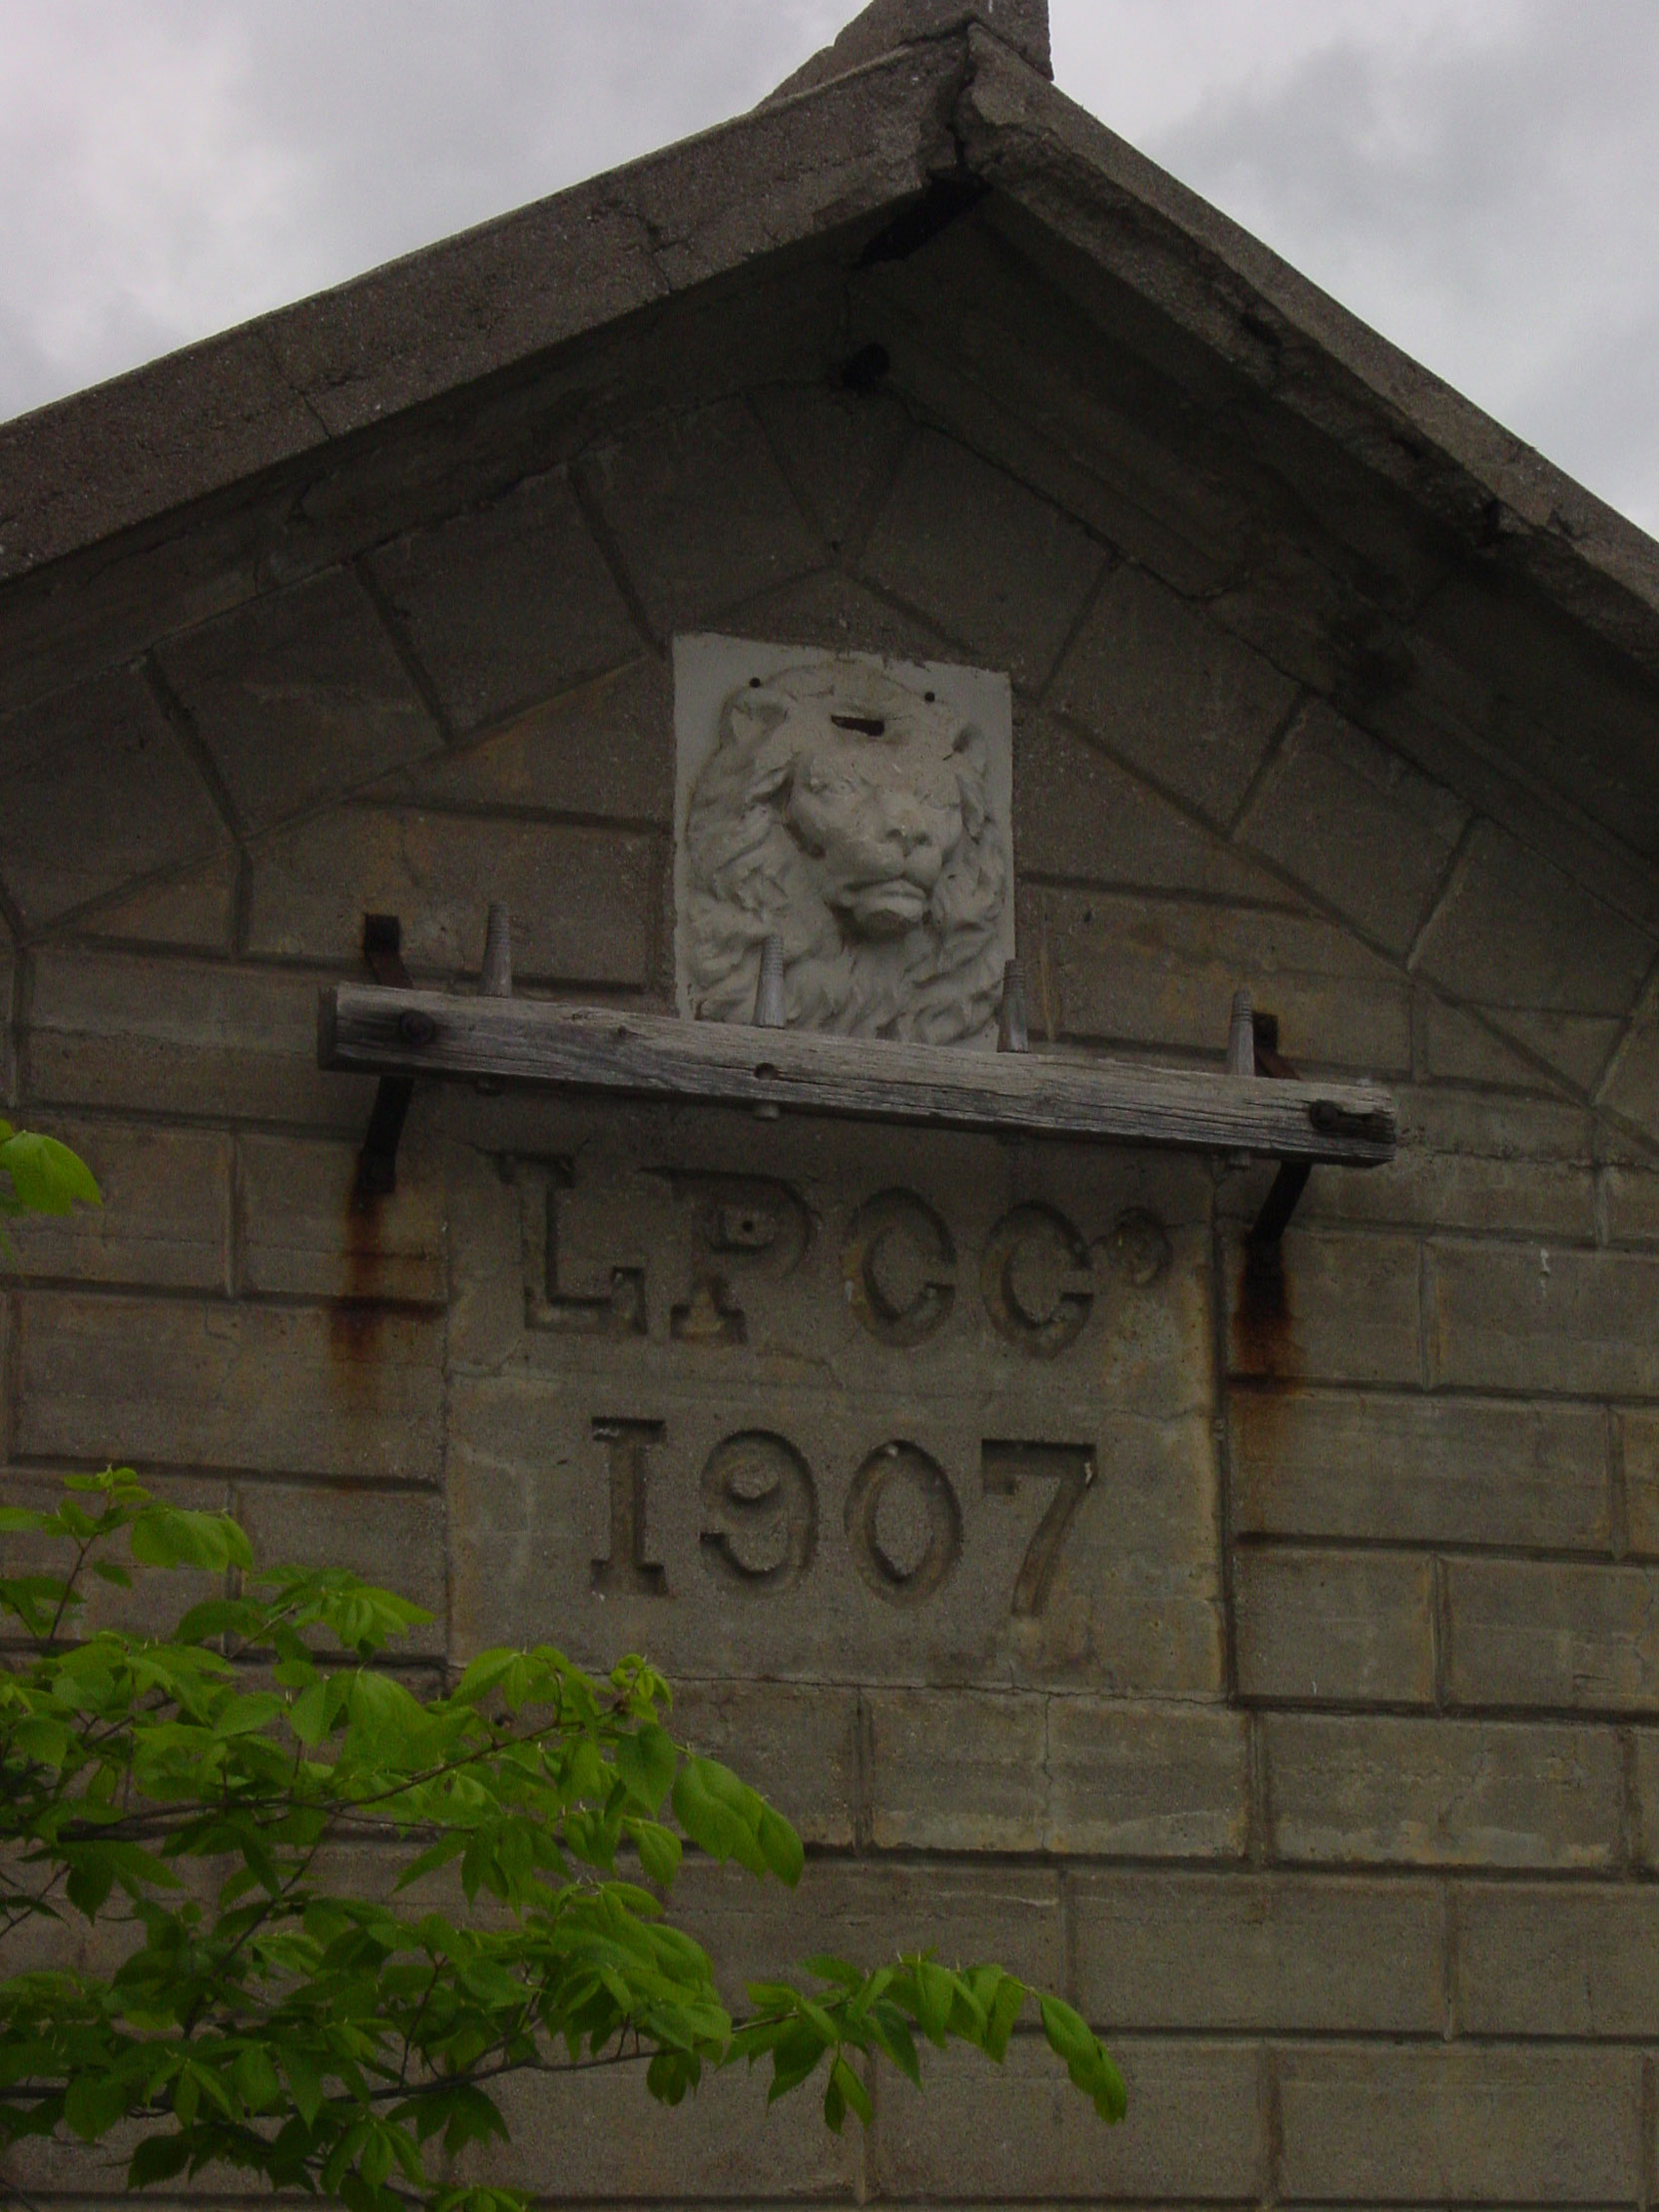 The Lakefield Portland Cement Company lion head logo of the company's pumphouse, built in 1907, on the Otanabee River in Lakefield, Ontario (photo by Author)